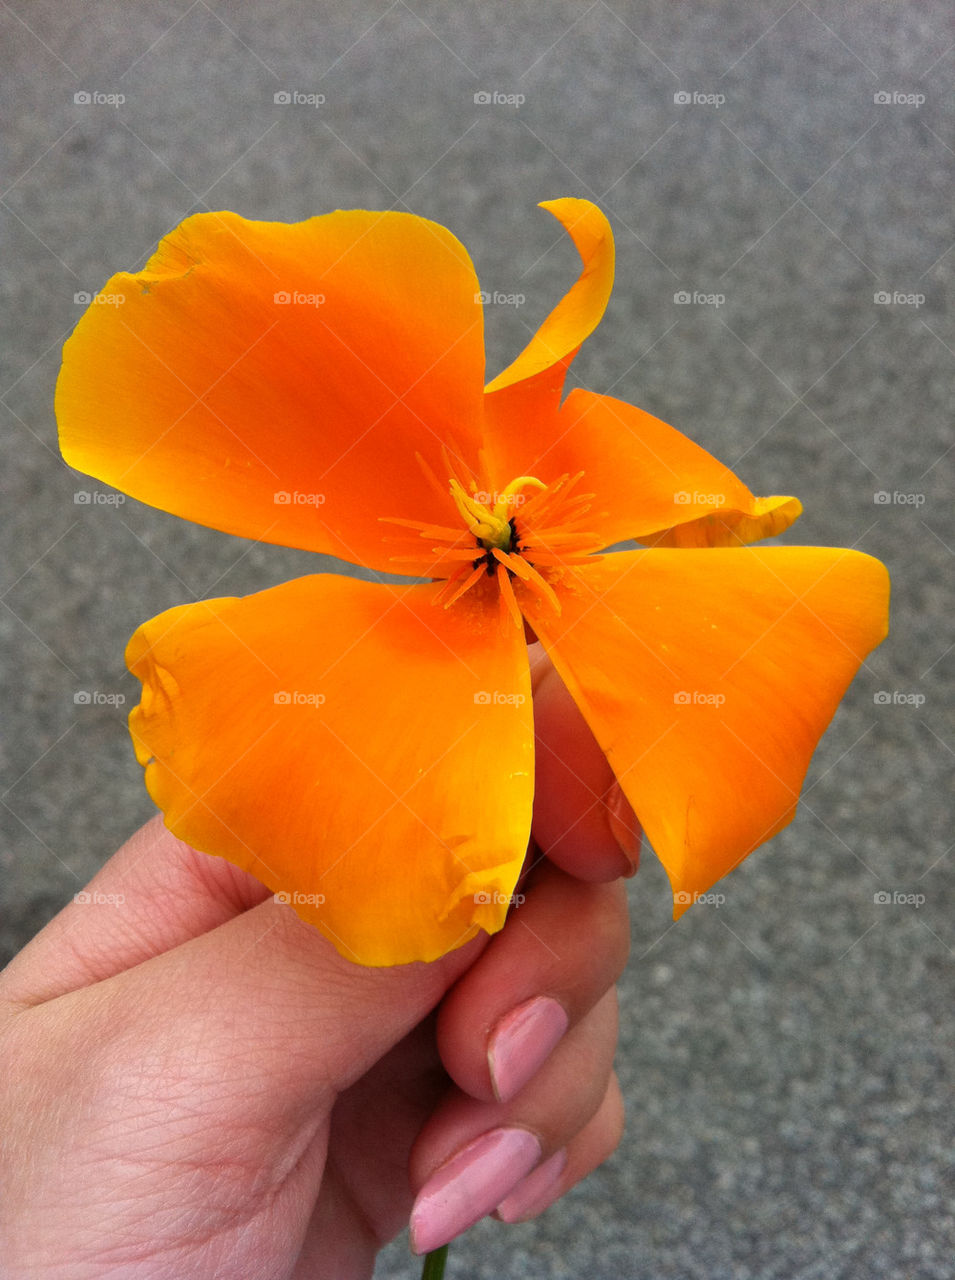 flower orange neon beautiful by miasthoughts